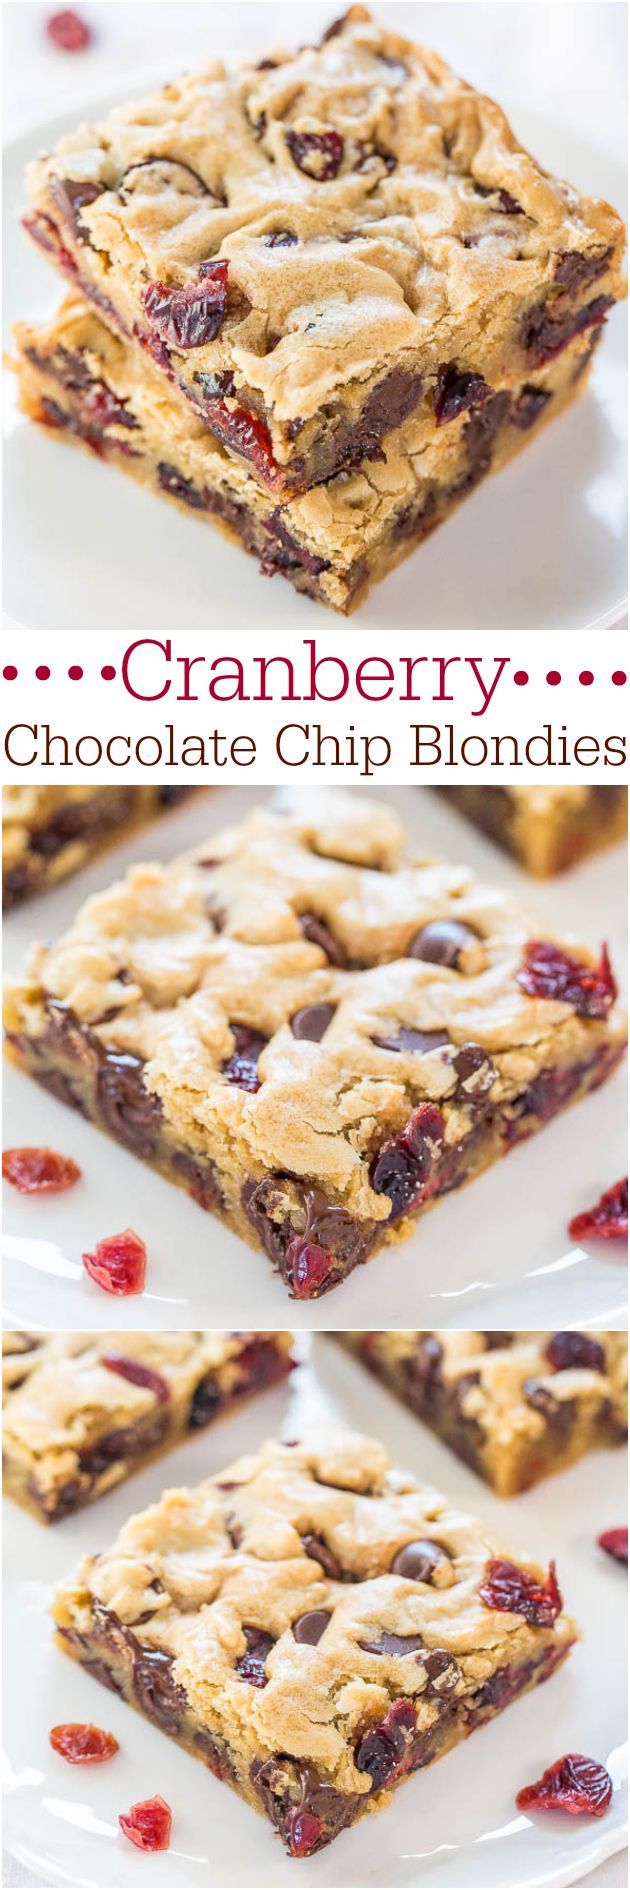 Cranberry Chocolate Chip Blondies – Super soft, buttery bars packed with chewy cranberries! And there’s a chocolate overload in